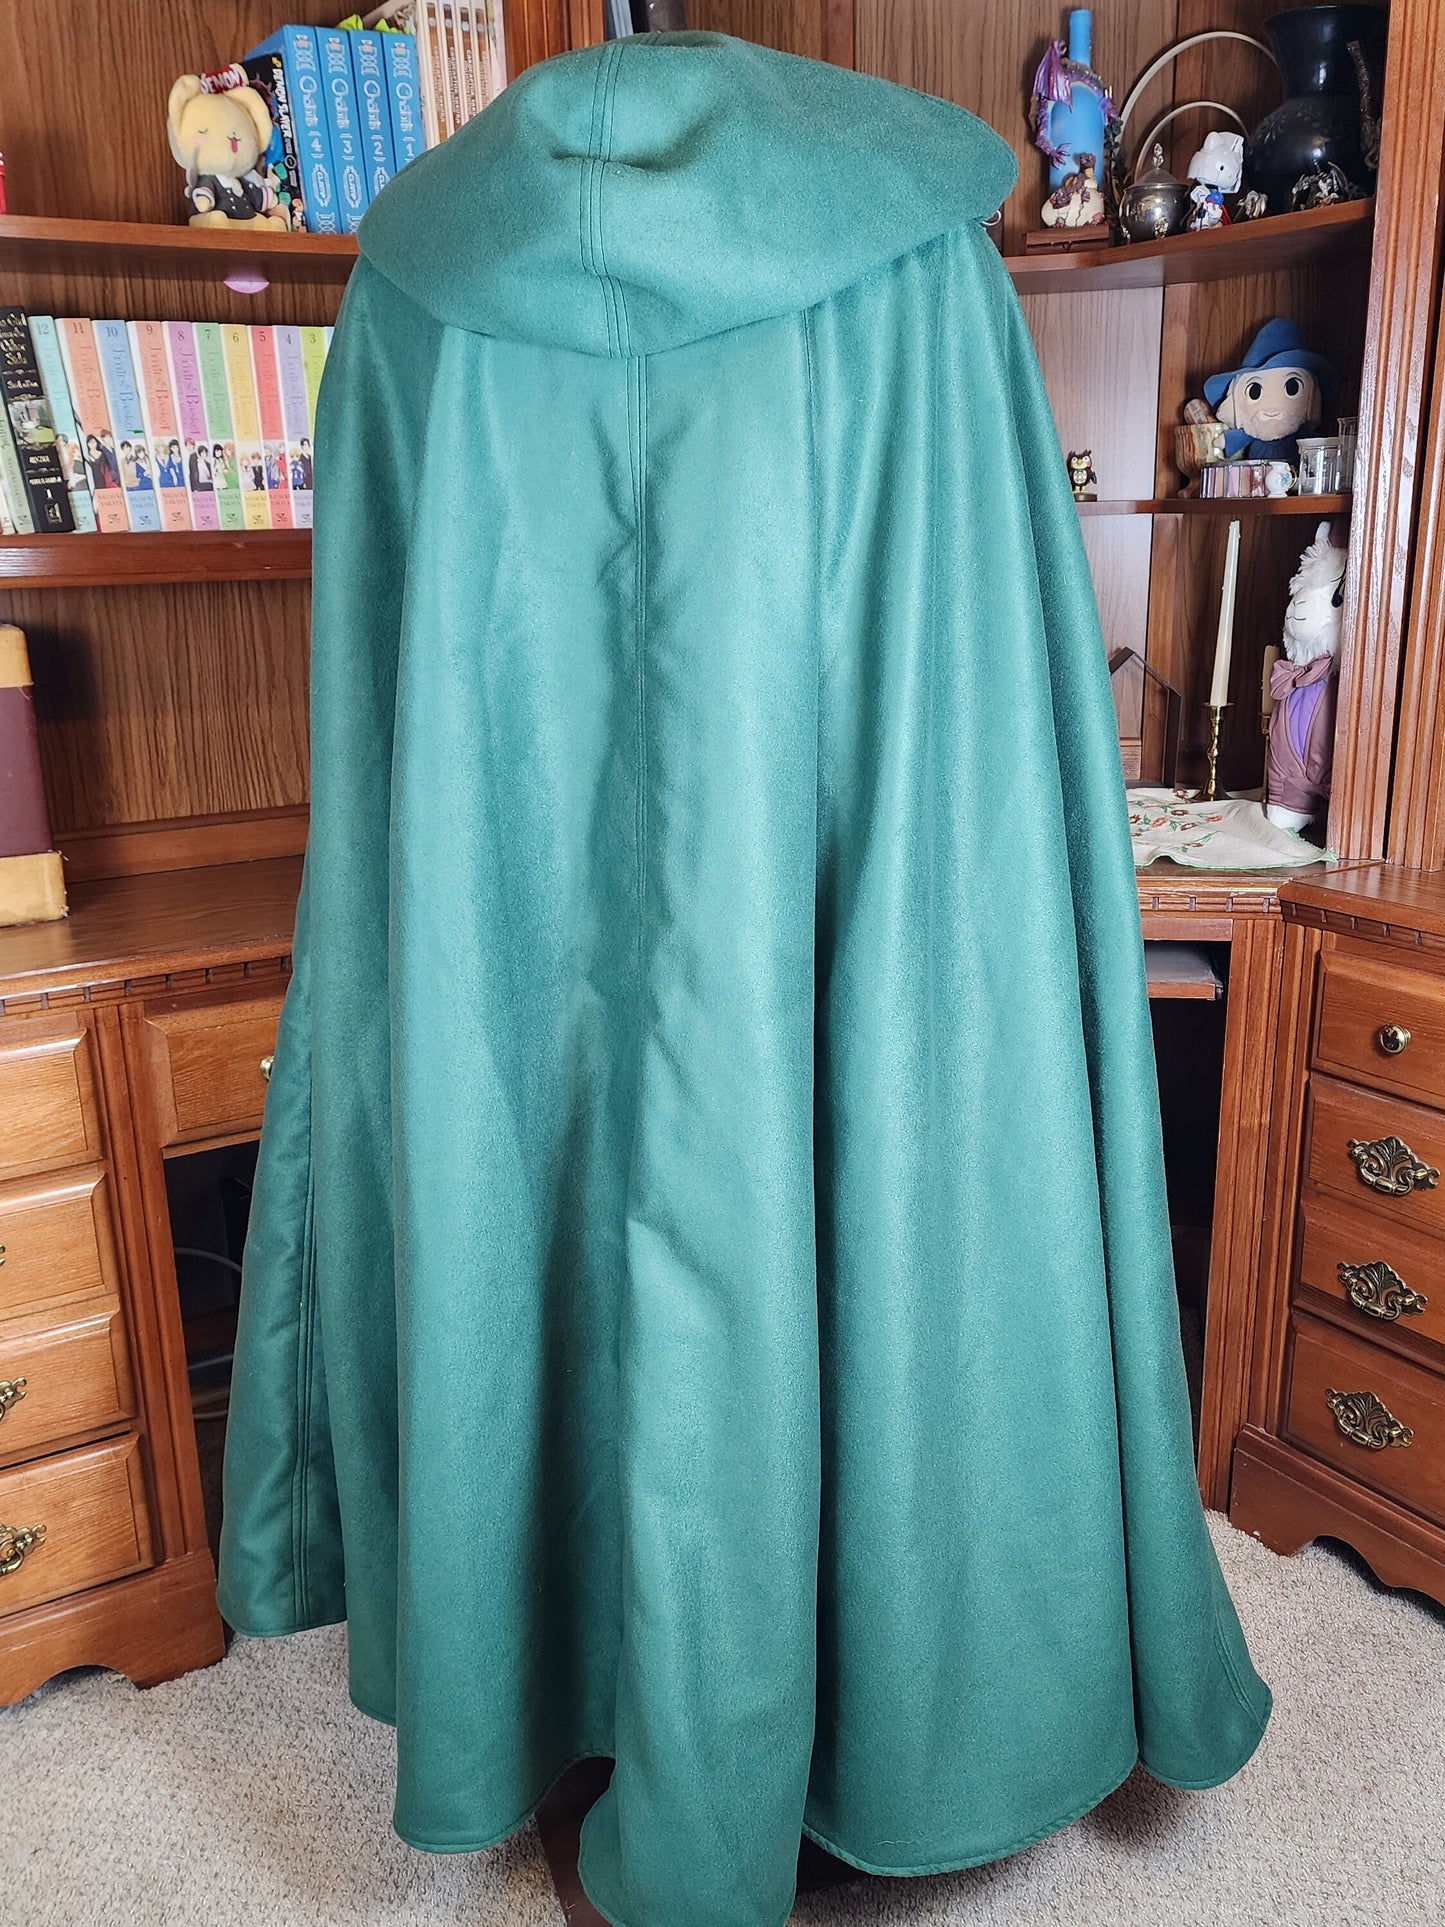 Winter Wanderer Cloak- Forest Green full circle cloak with Black water resistant lining